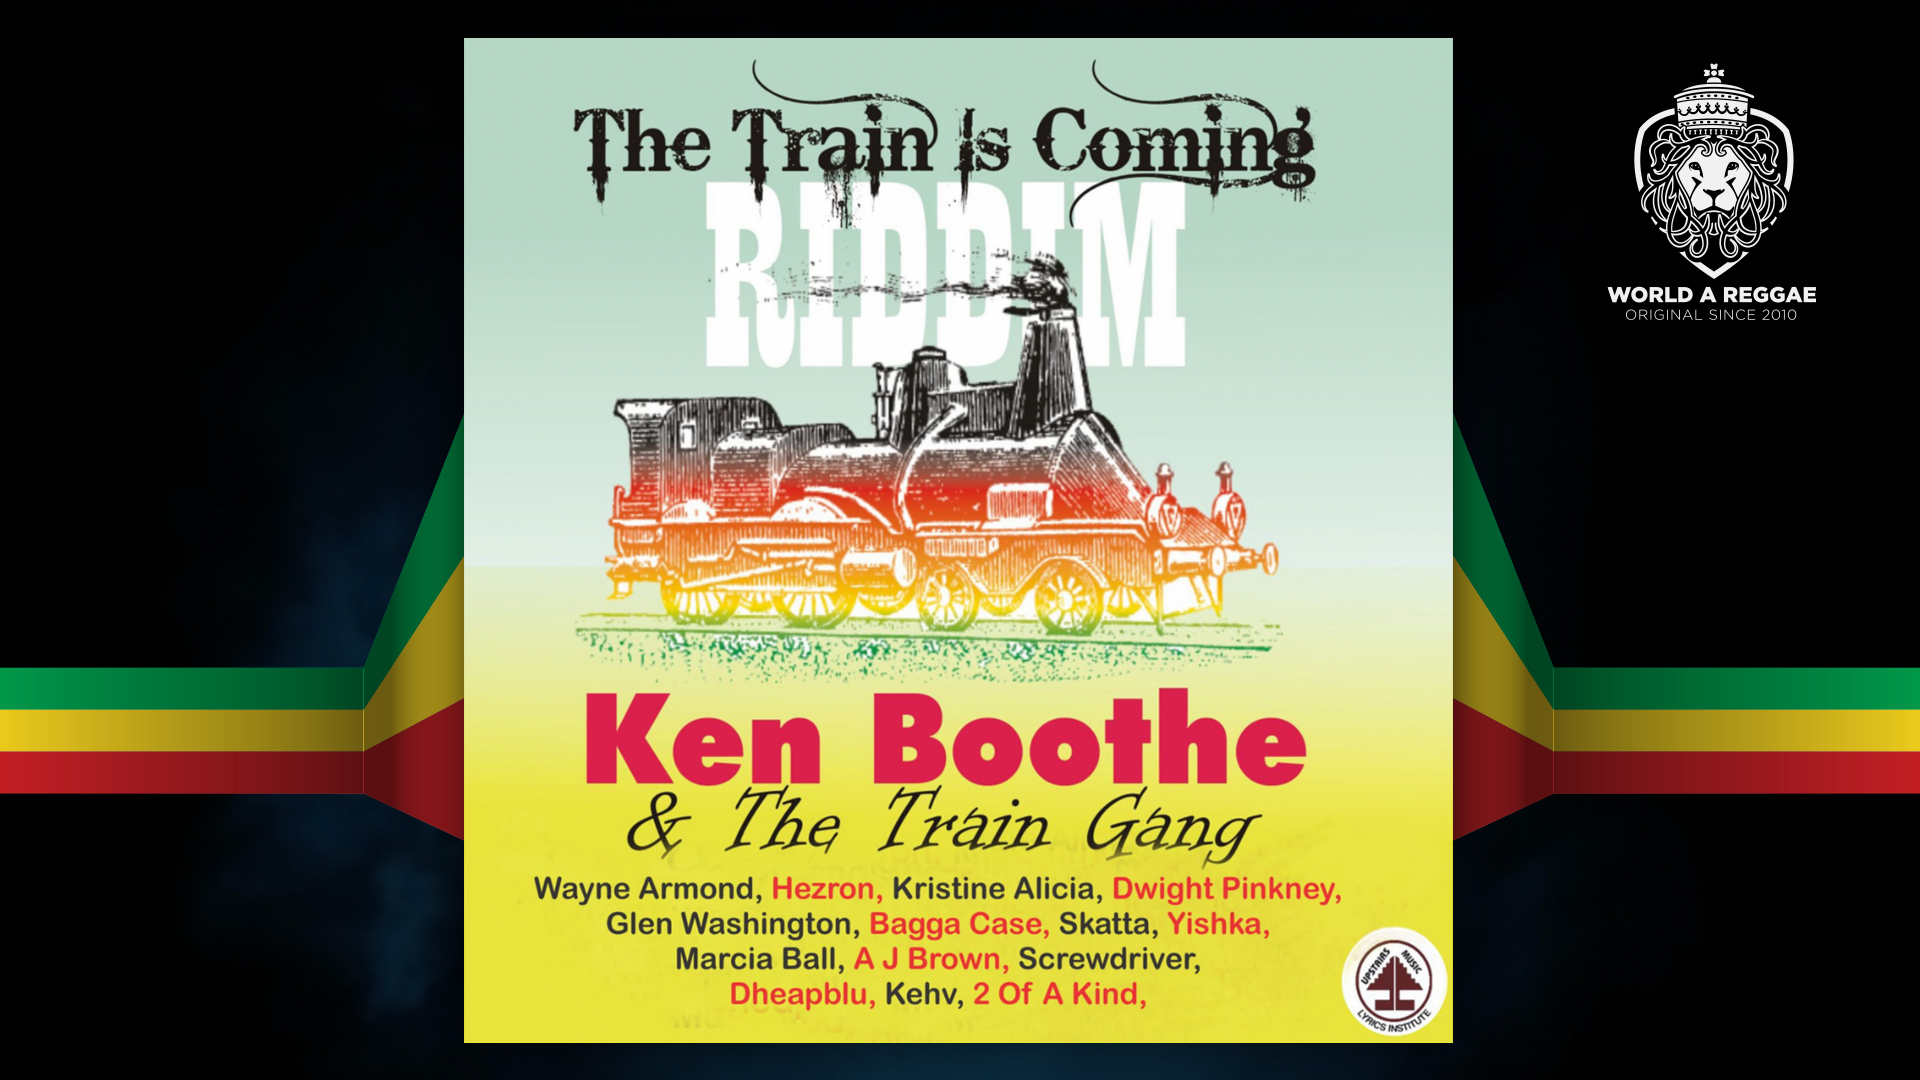 Ken Boothe & The Train Gang presents "The Train Is Coming" Riddim